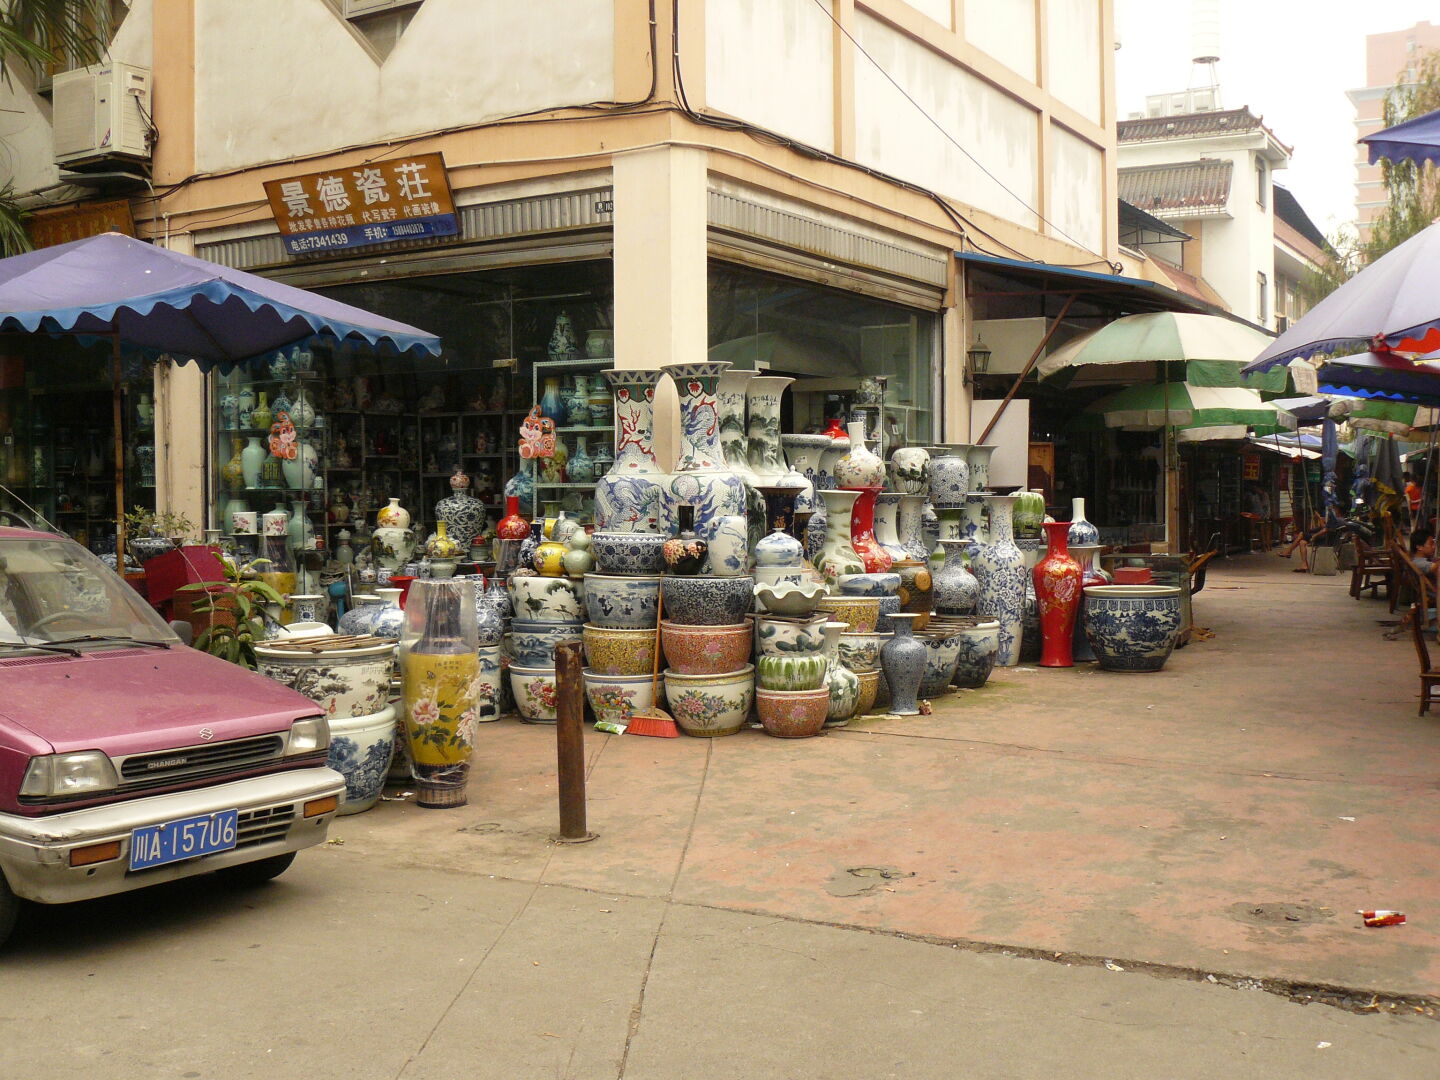 I visited the Songxianqiao Art City, an area full of small shops that offer all kinds of Chinese art, like these vases. There were also shops selling jade bracelets and amulets and wood carvings.